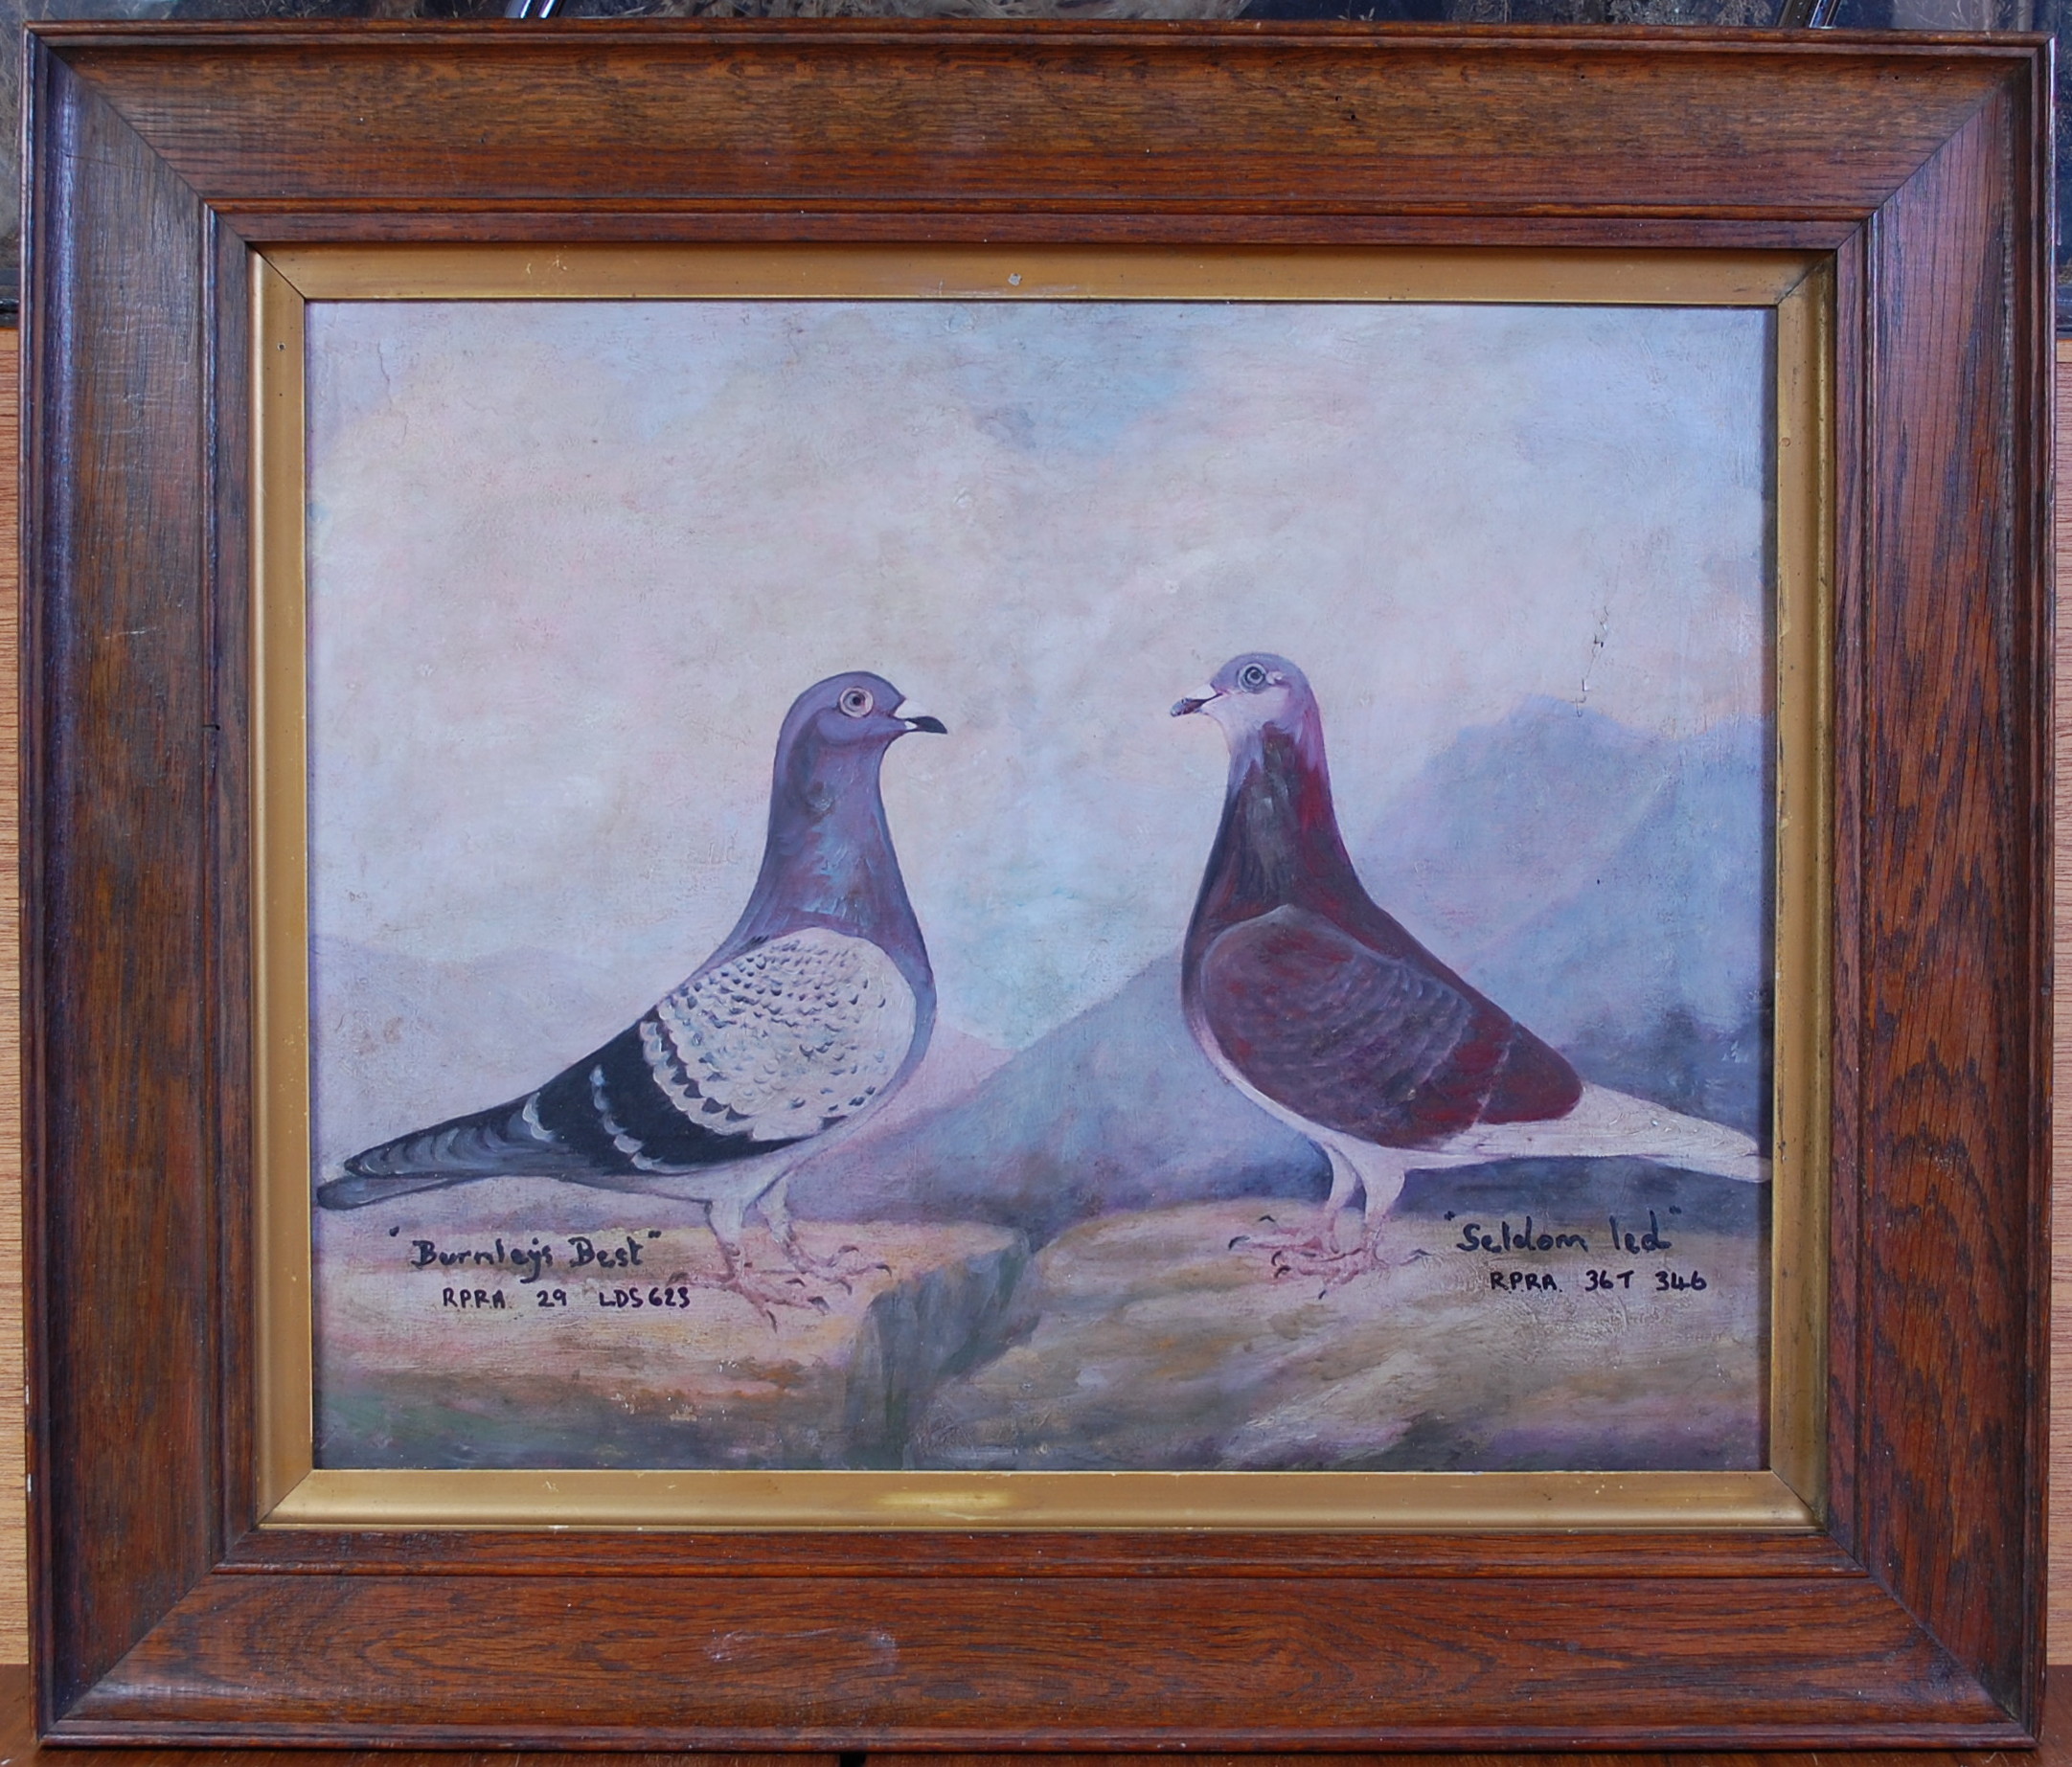 Mid-20th century English school - The racing pigeons Burnley's Best and Seldom Led, oil on canvas, - Image 2 of 8